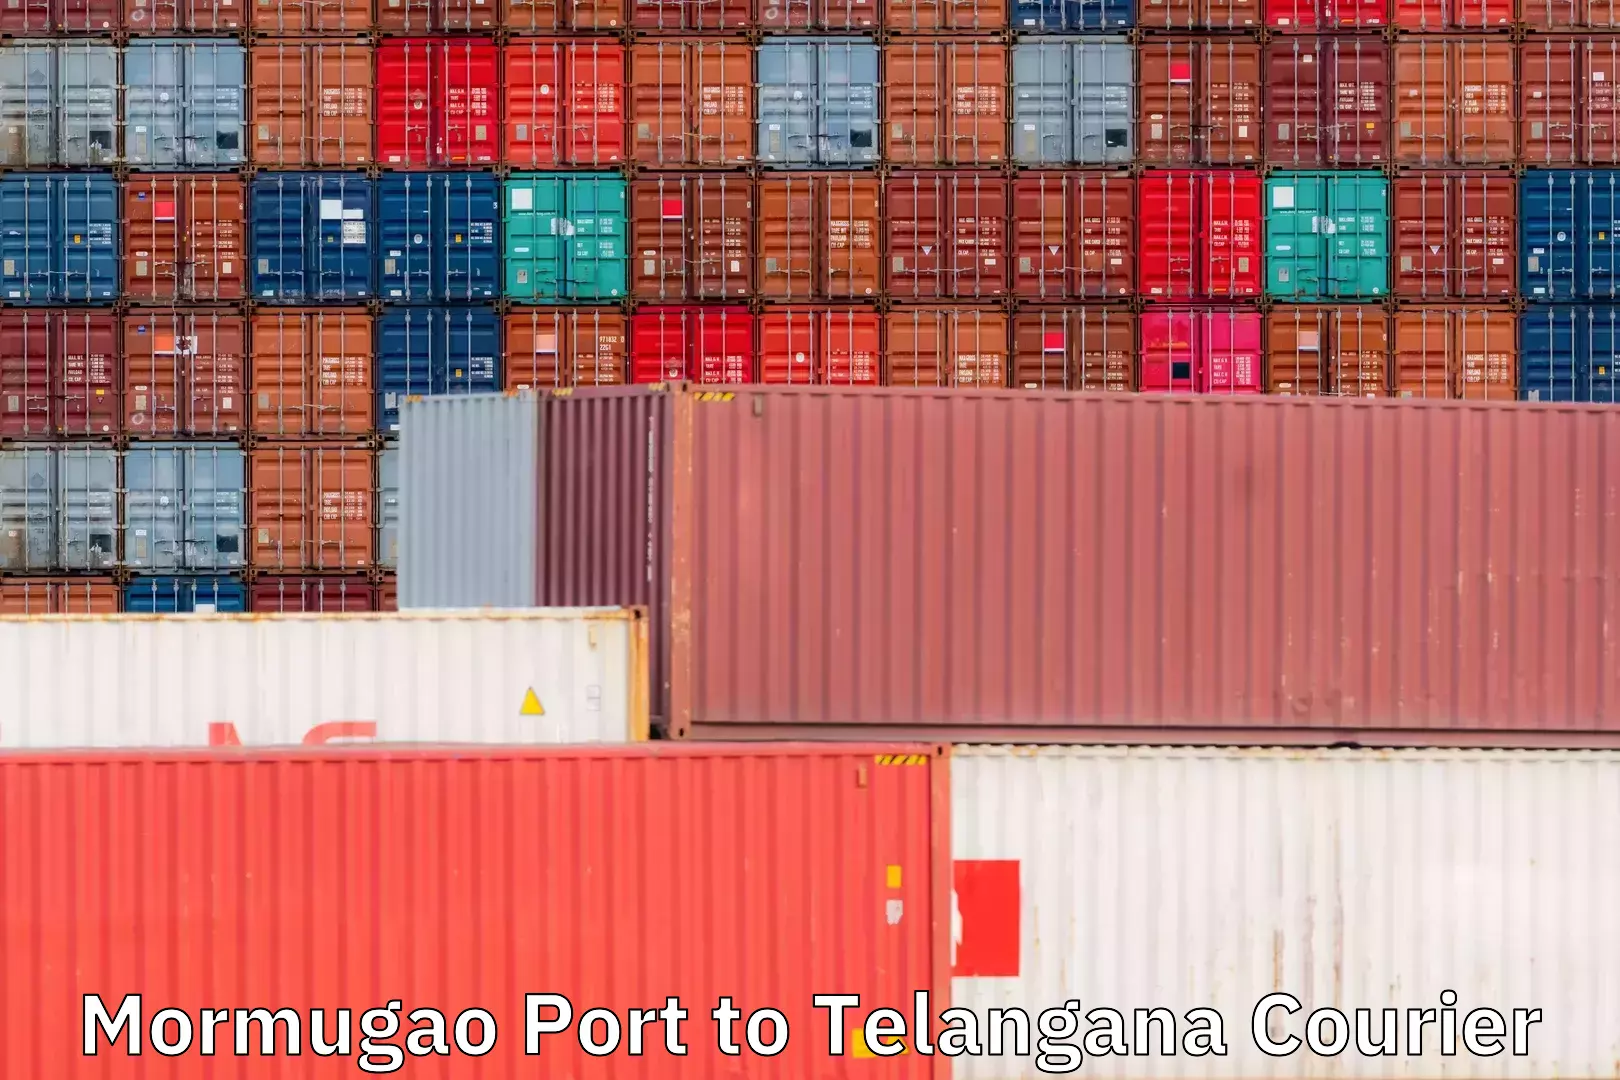 Courier dispatch services in Mormugao Port to Telangana